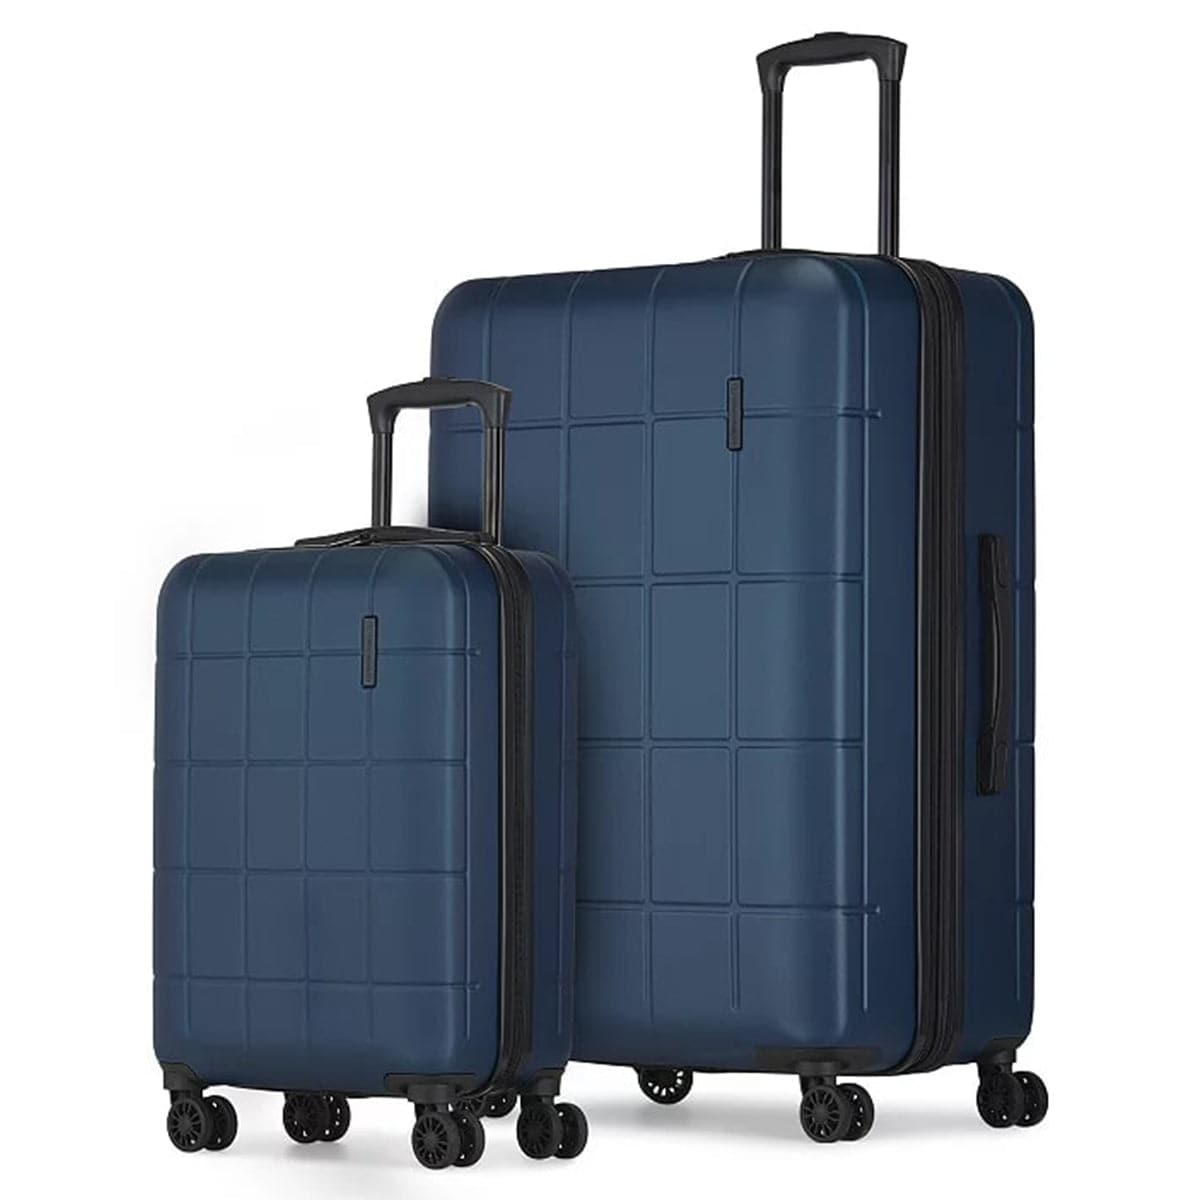 Swiss Mobility VCR Two Piece Luggage Set